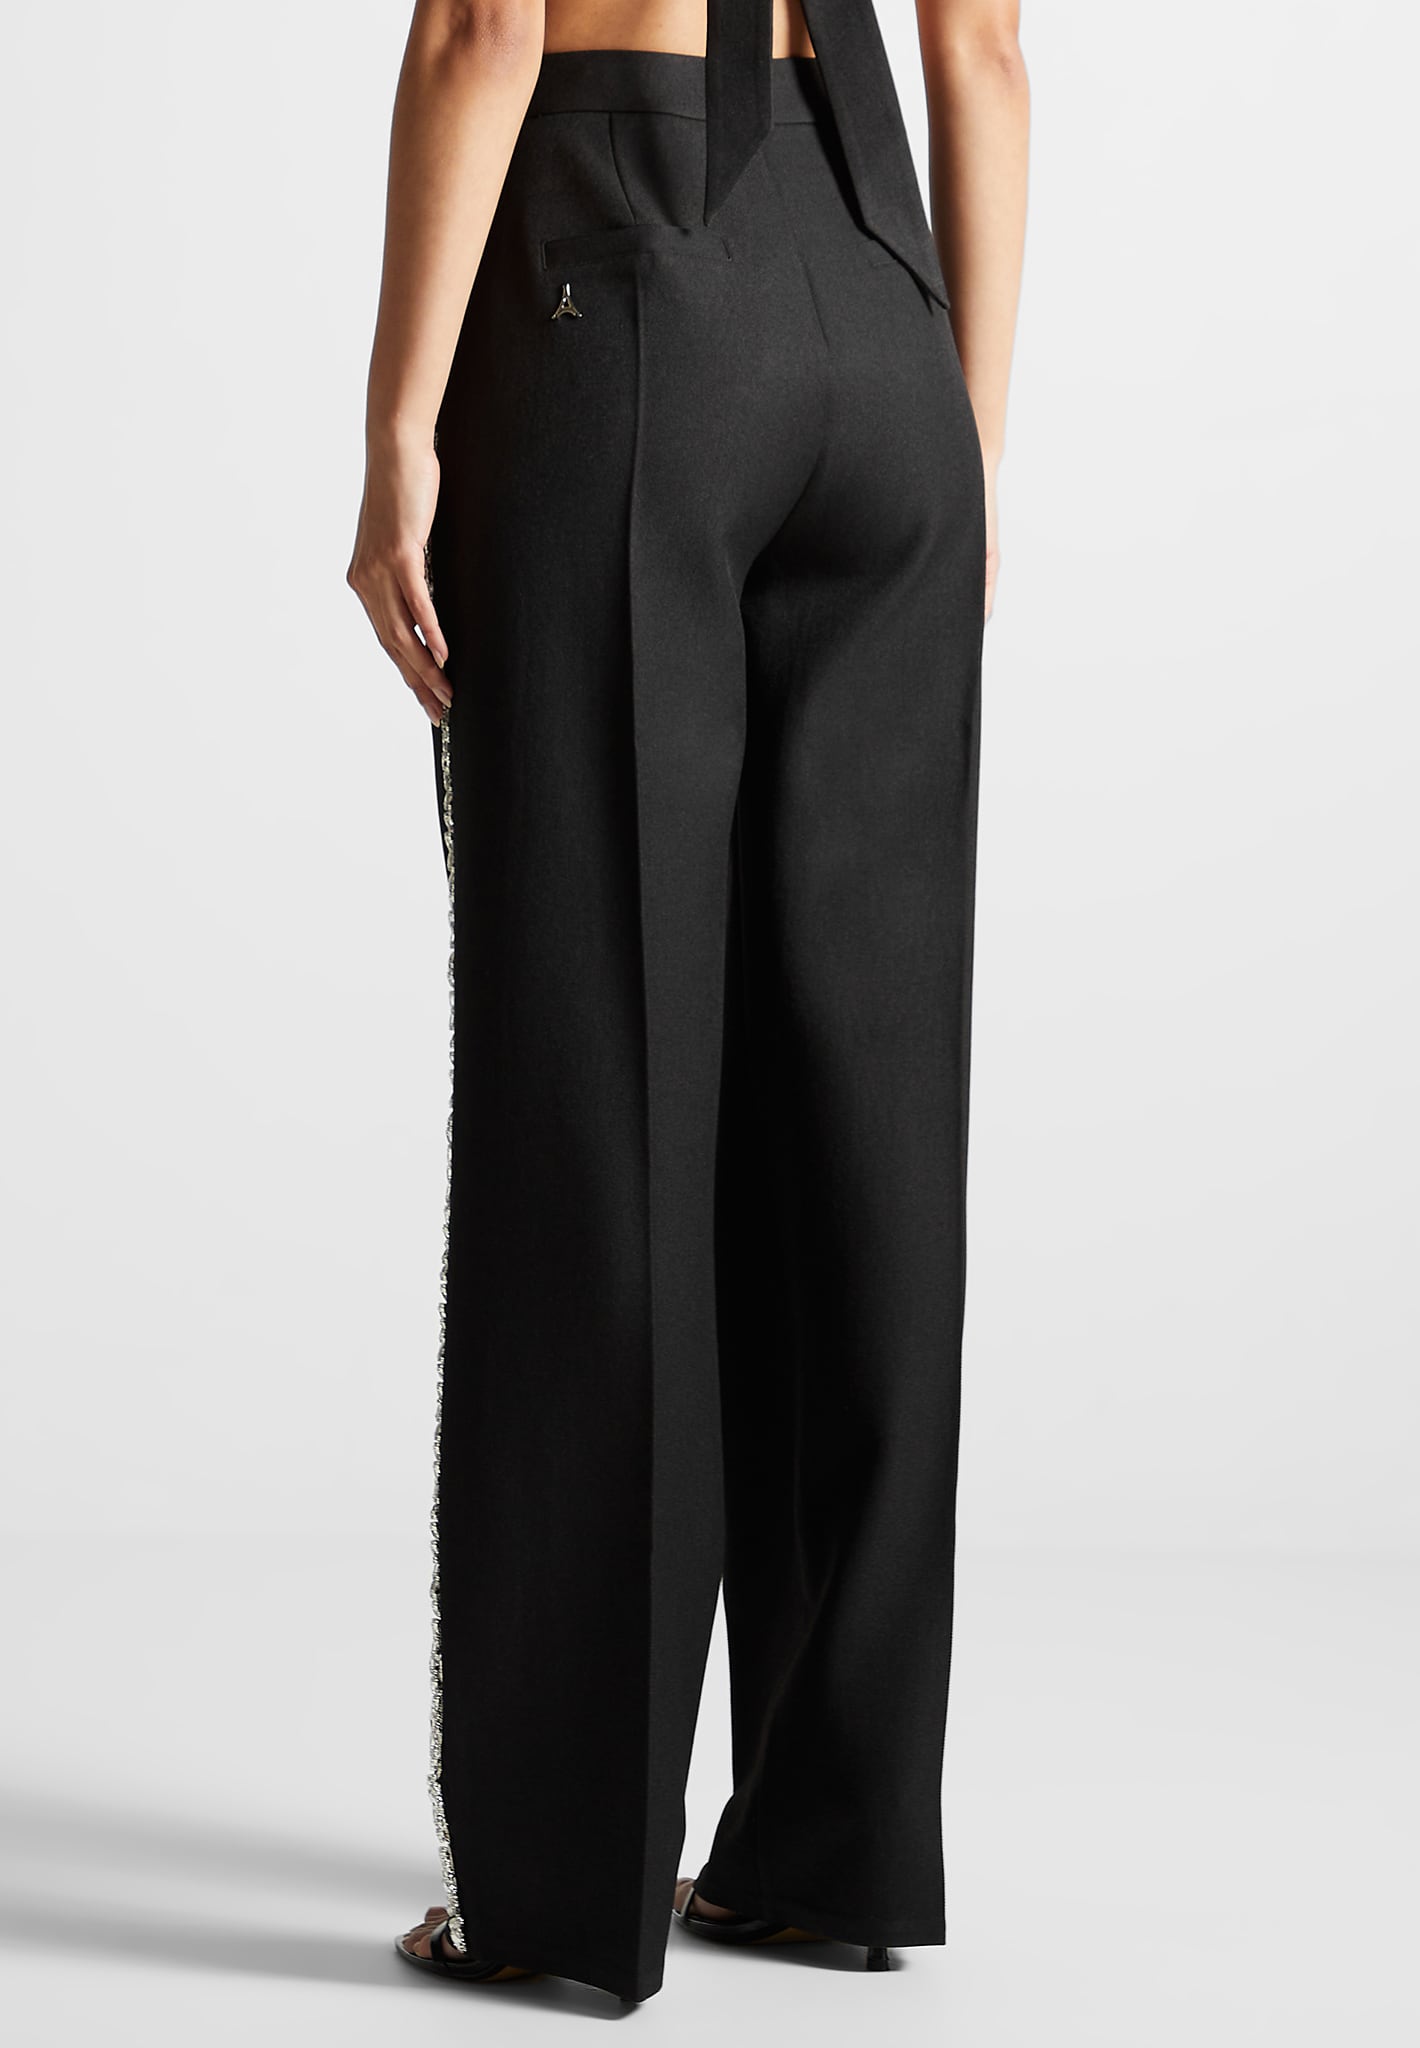 embellished-tailored-trousers-black